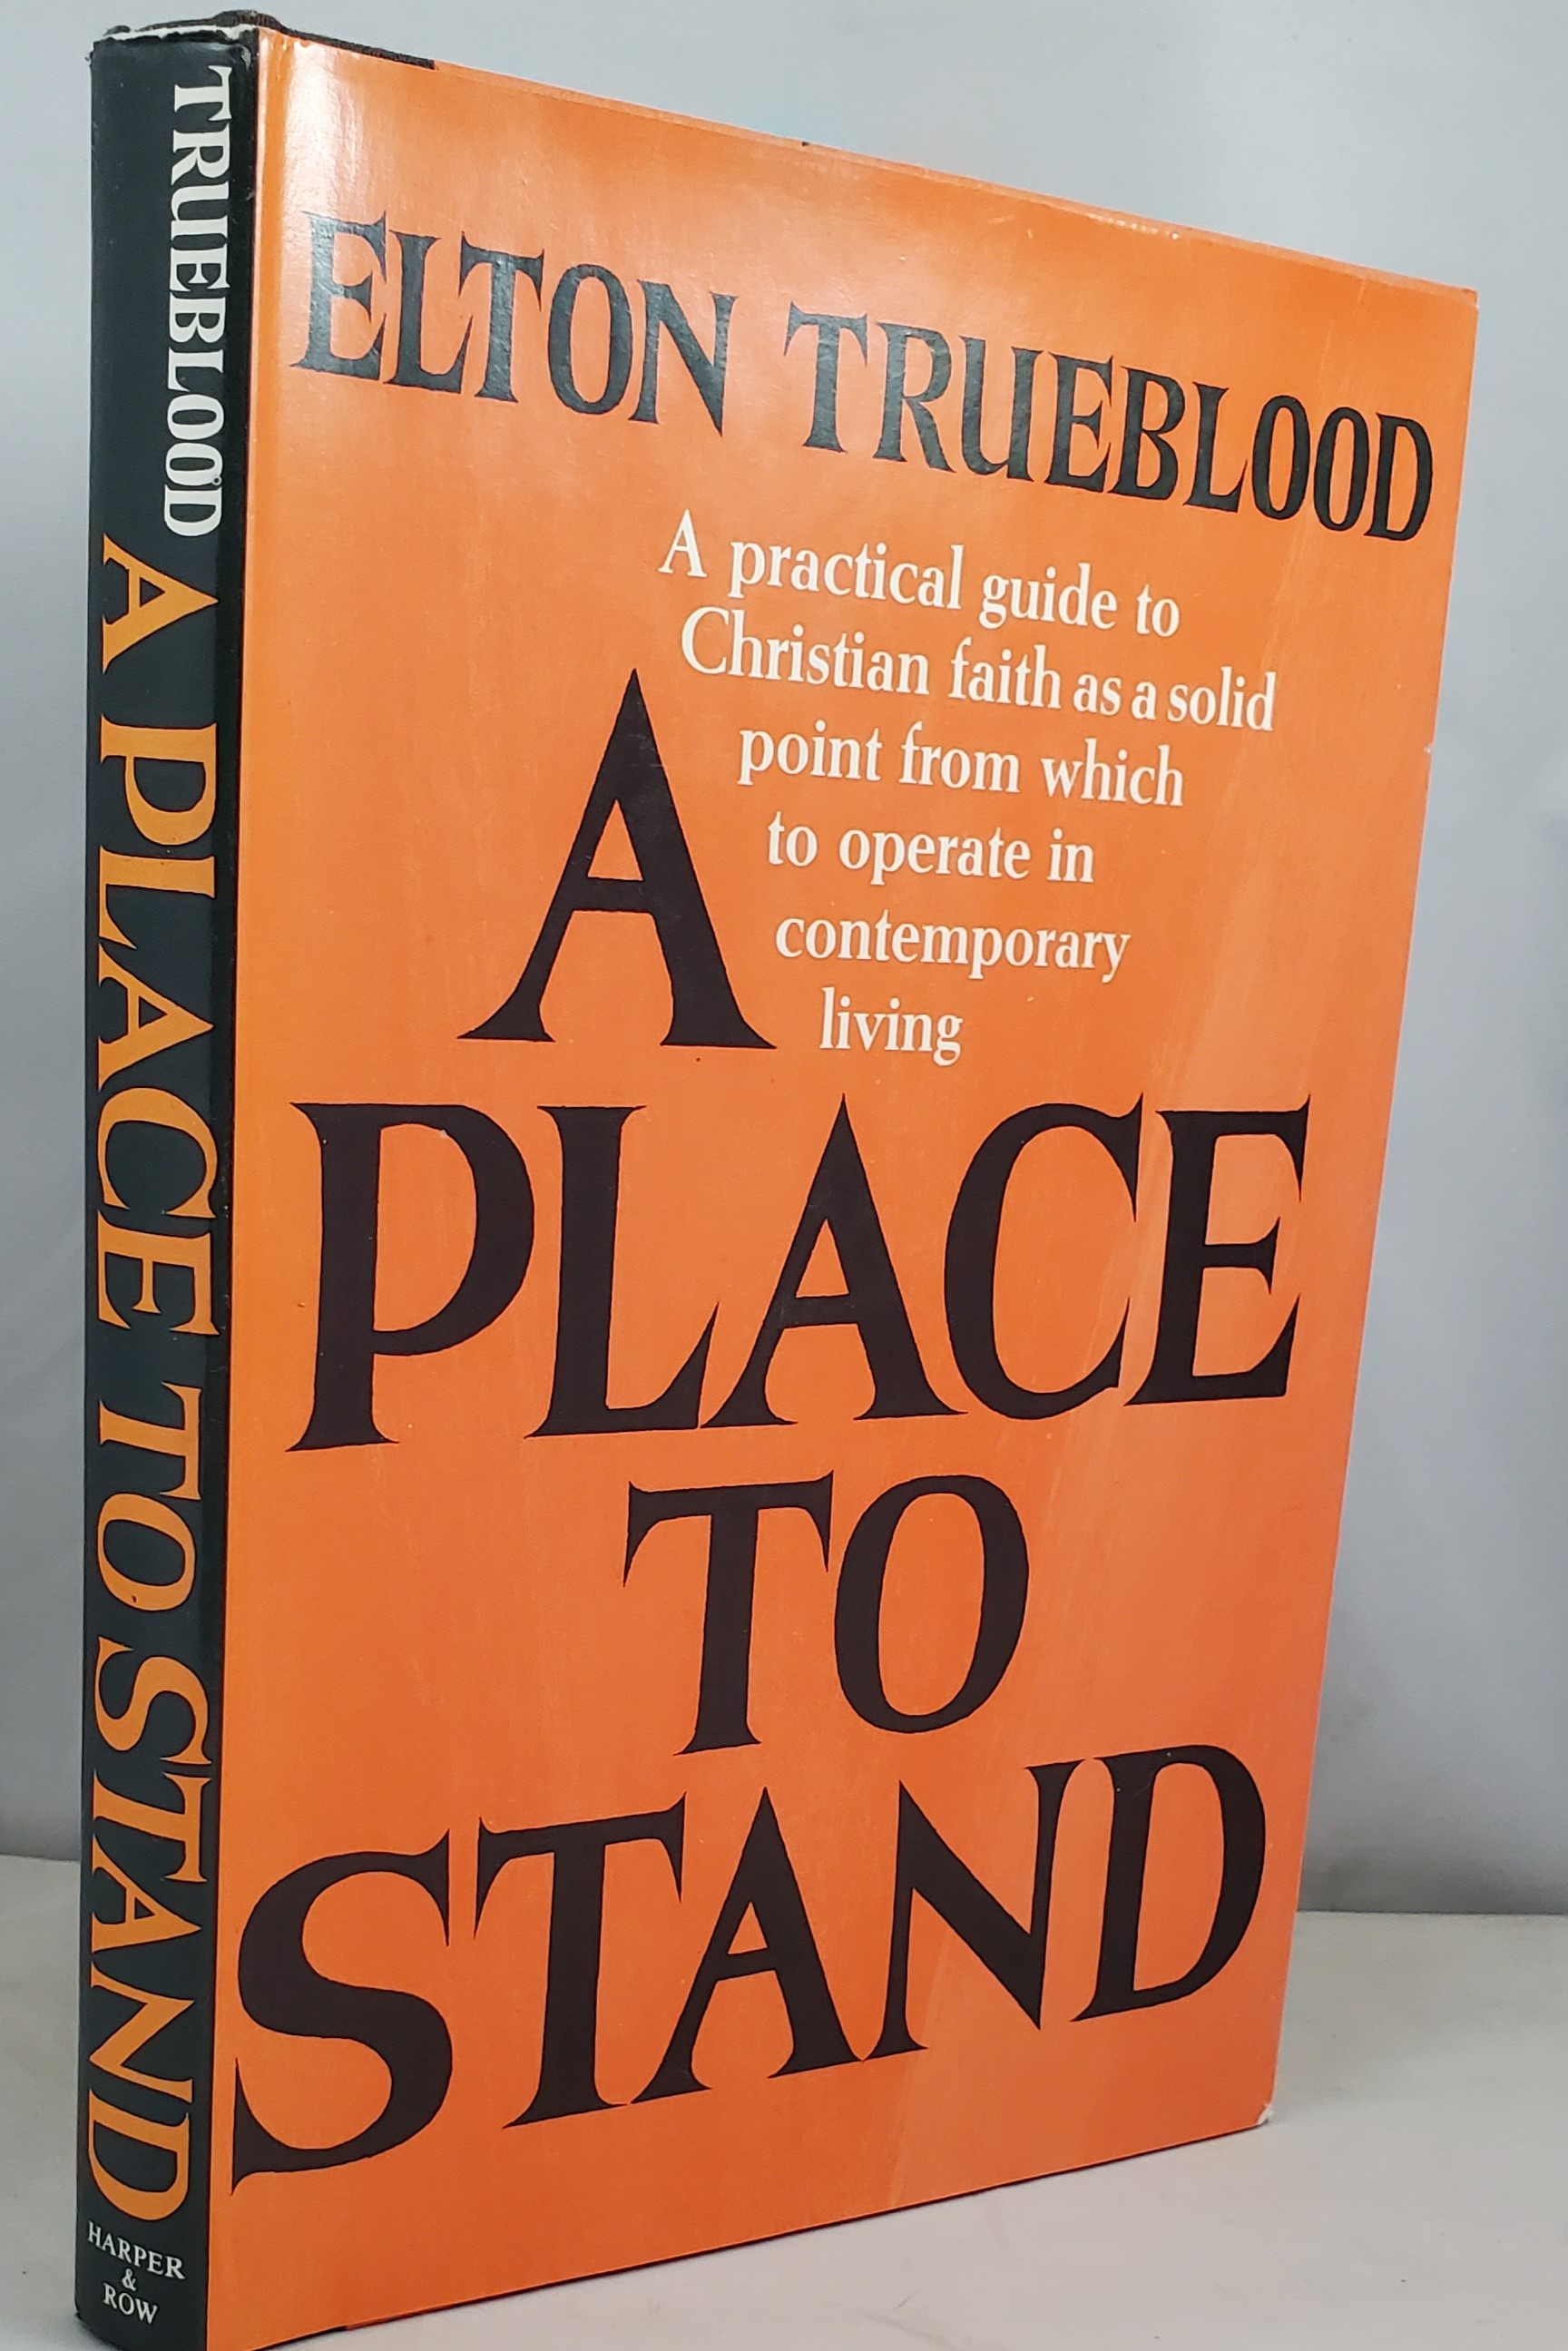 place to stand